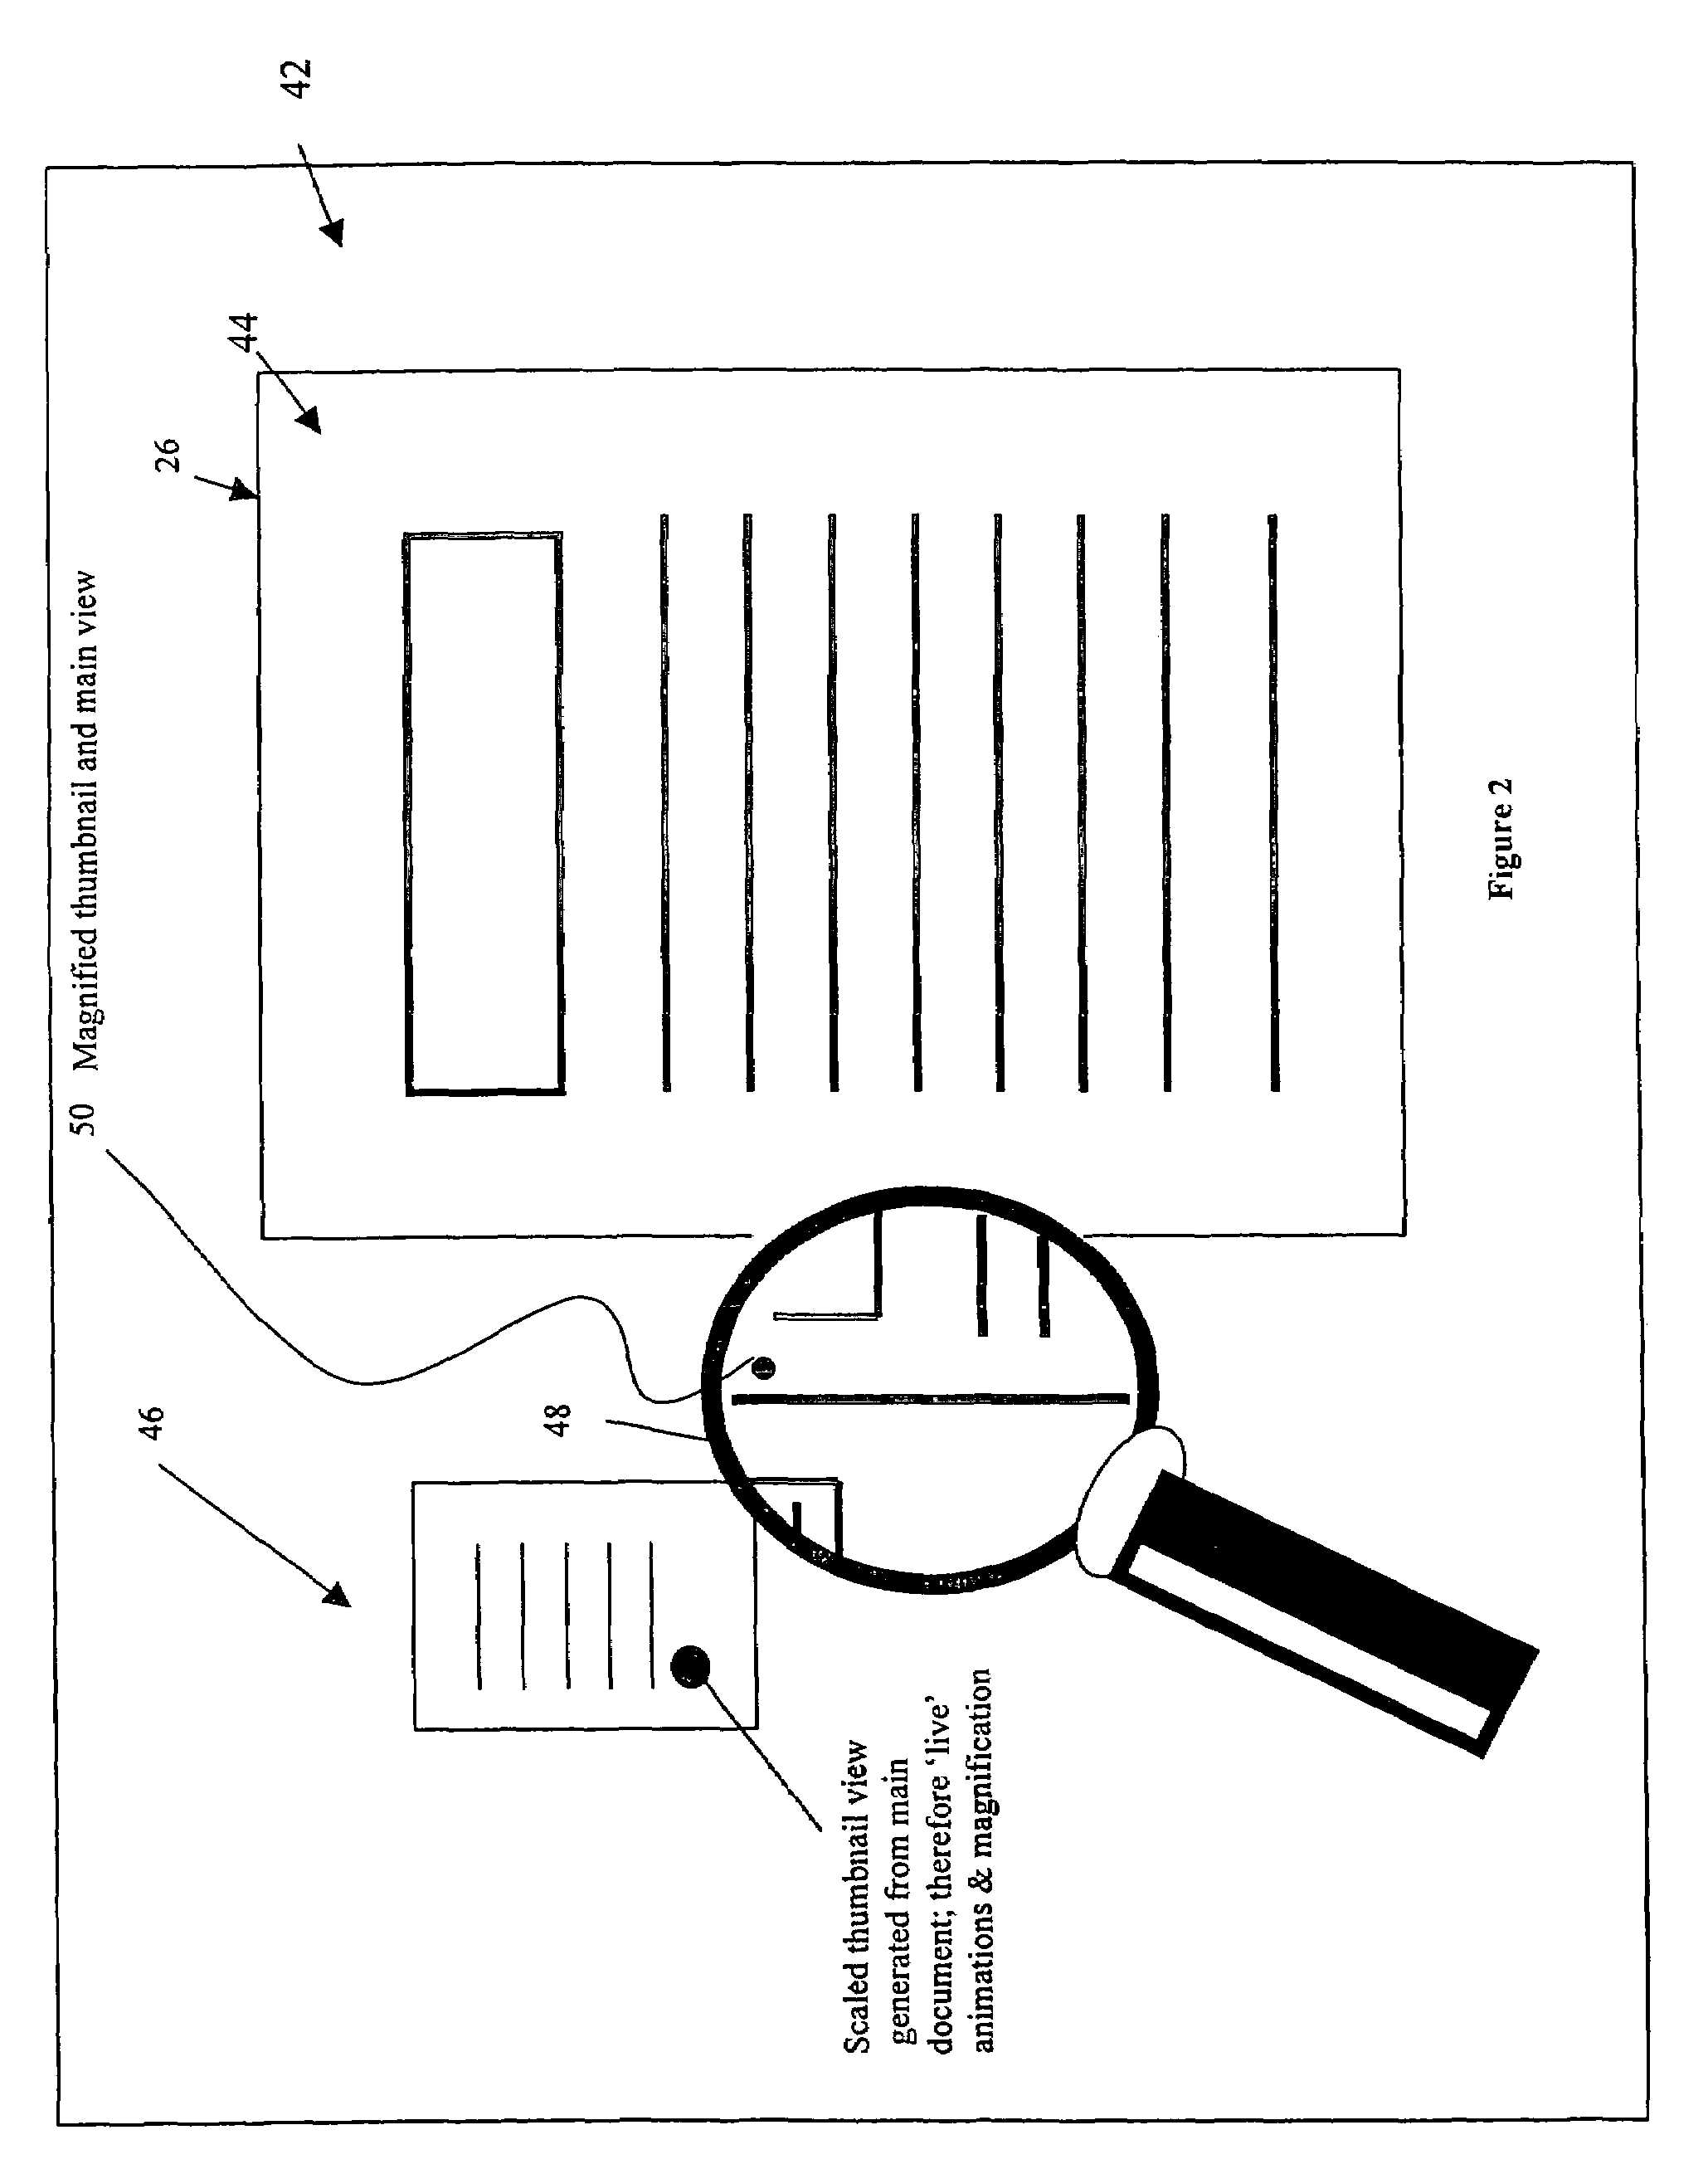 User interface systems and methods for viewing and manipulating digital documents